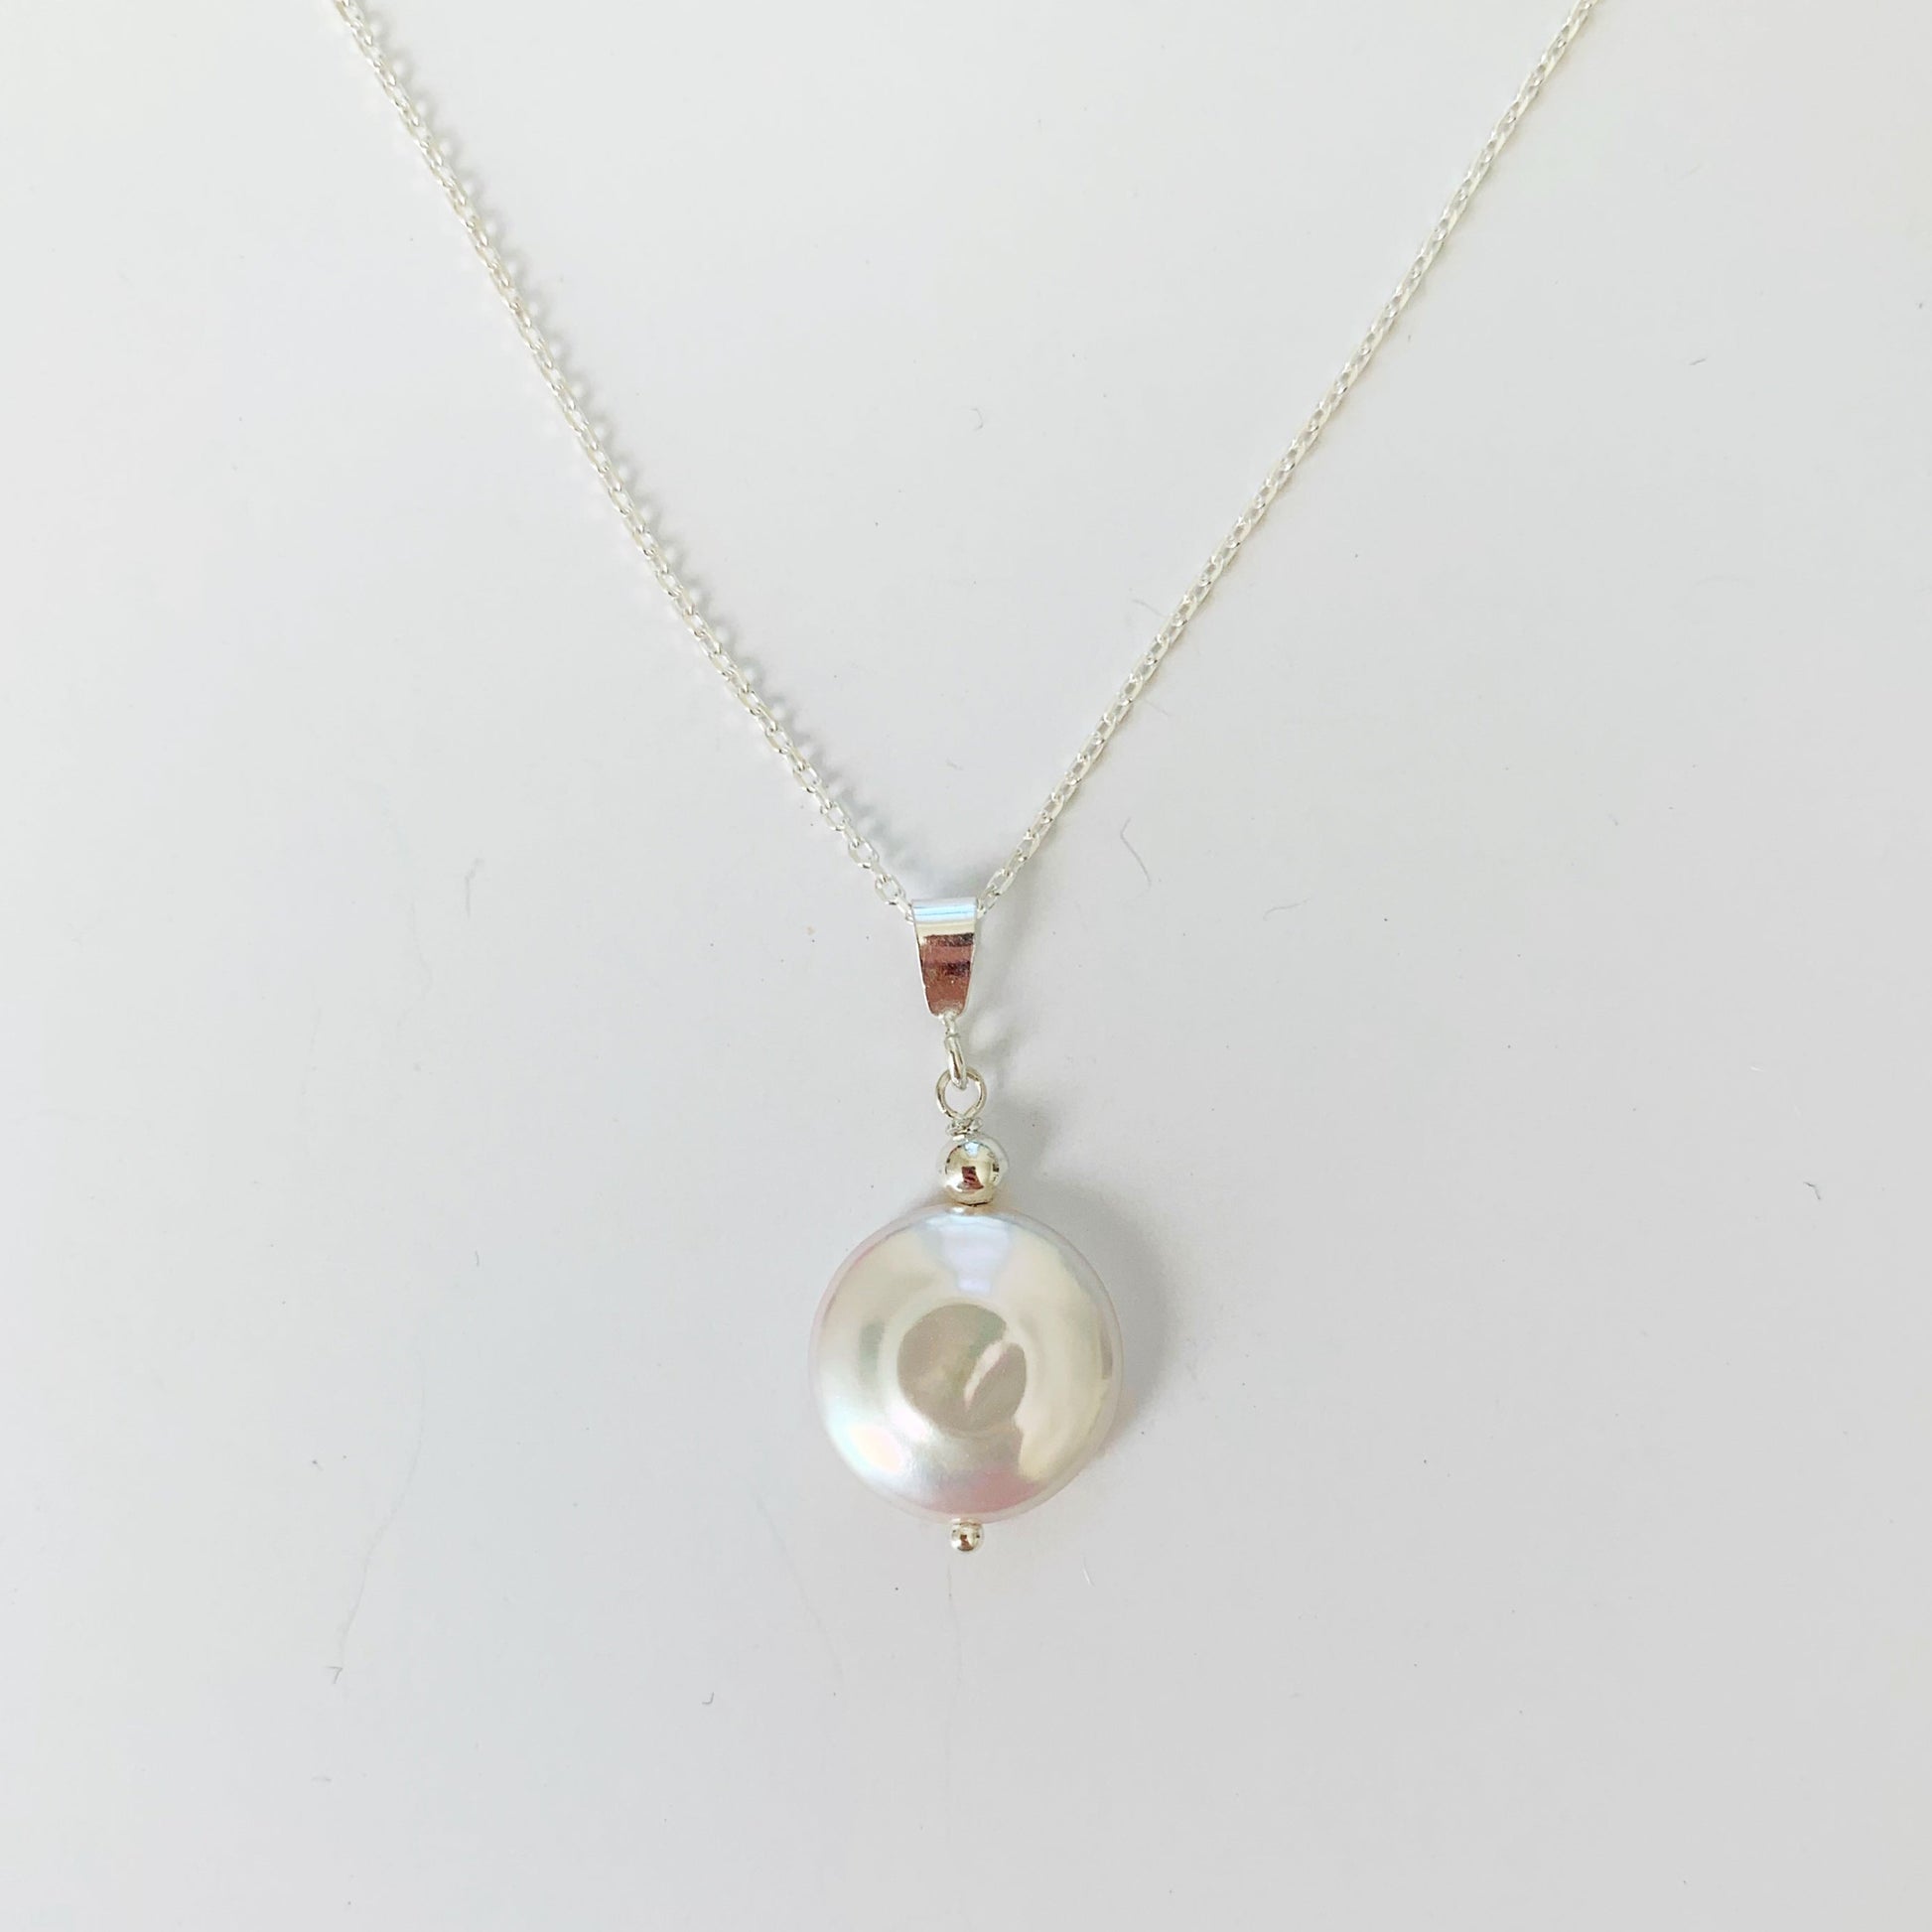 Newport Gala pendant in sterling silver by mermaids and madeleines is a large freshwater coin pearl pendant on sterling chain with silver findings. this one is pictured on a white surface